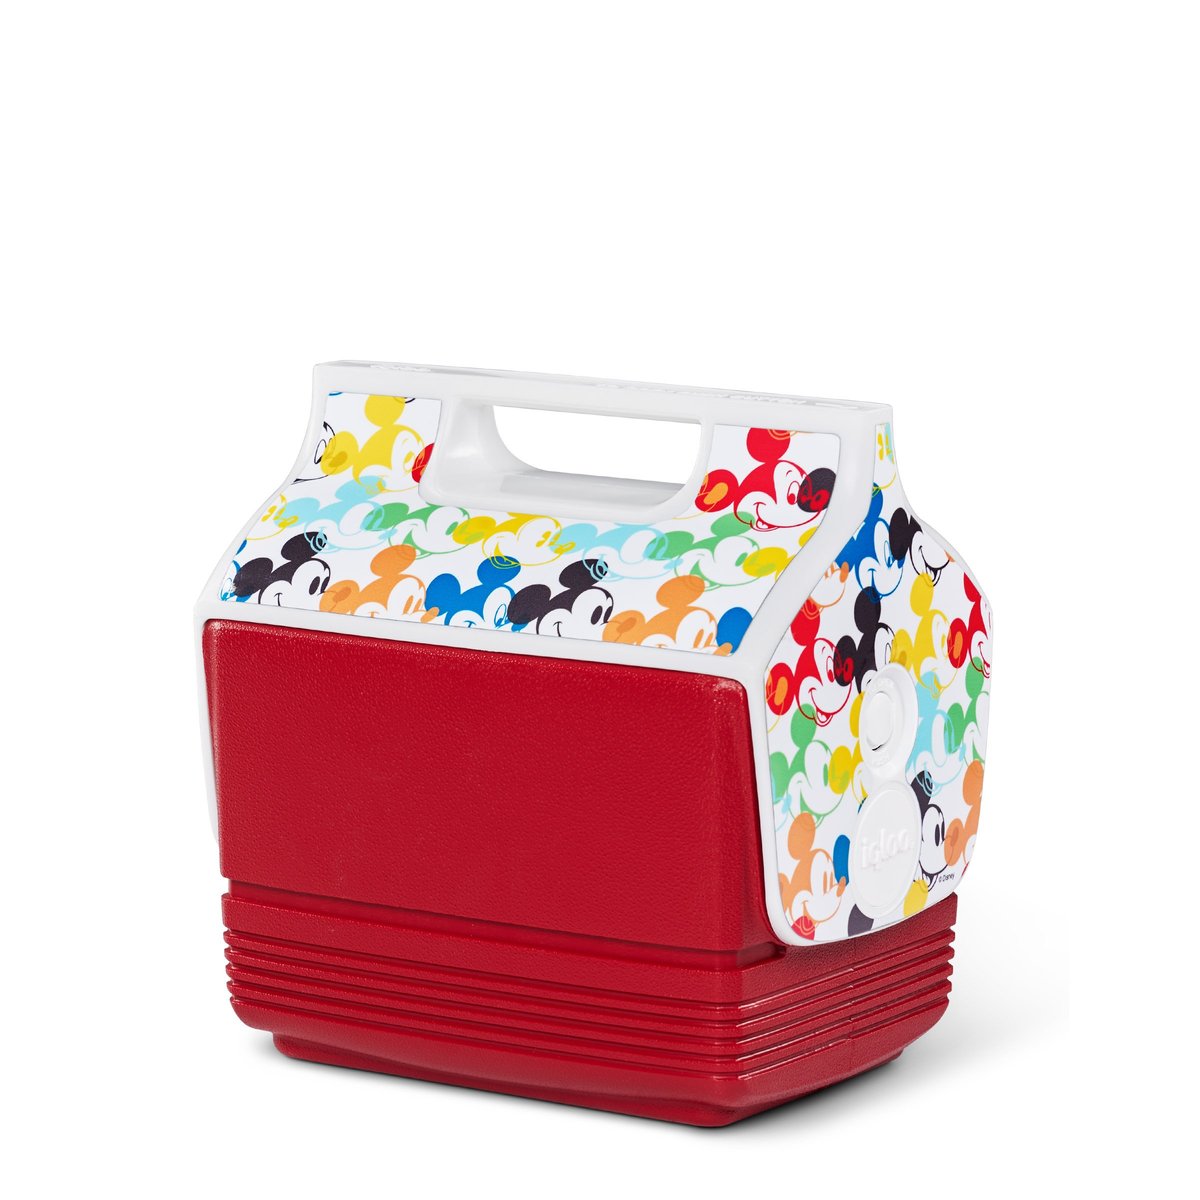 Disney Igloo Coolers Are A Magical Way To Keep Things Cool